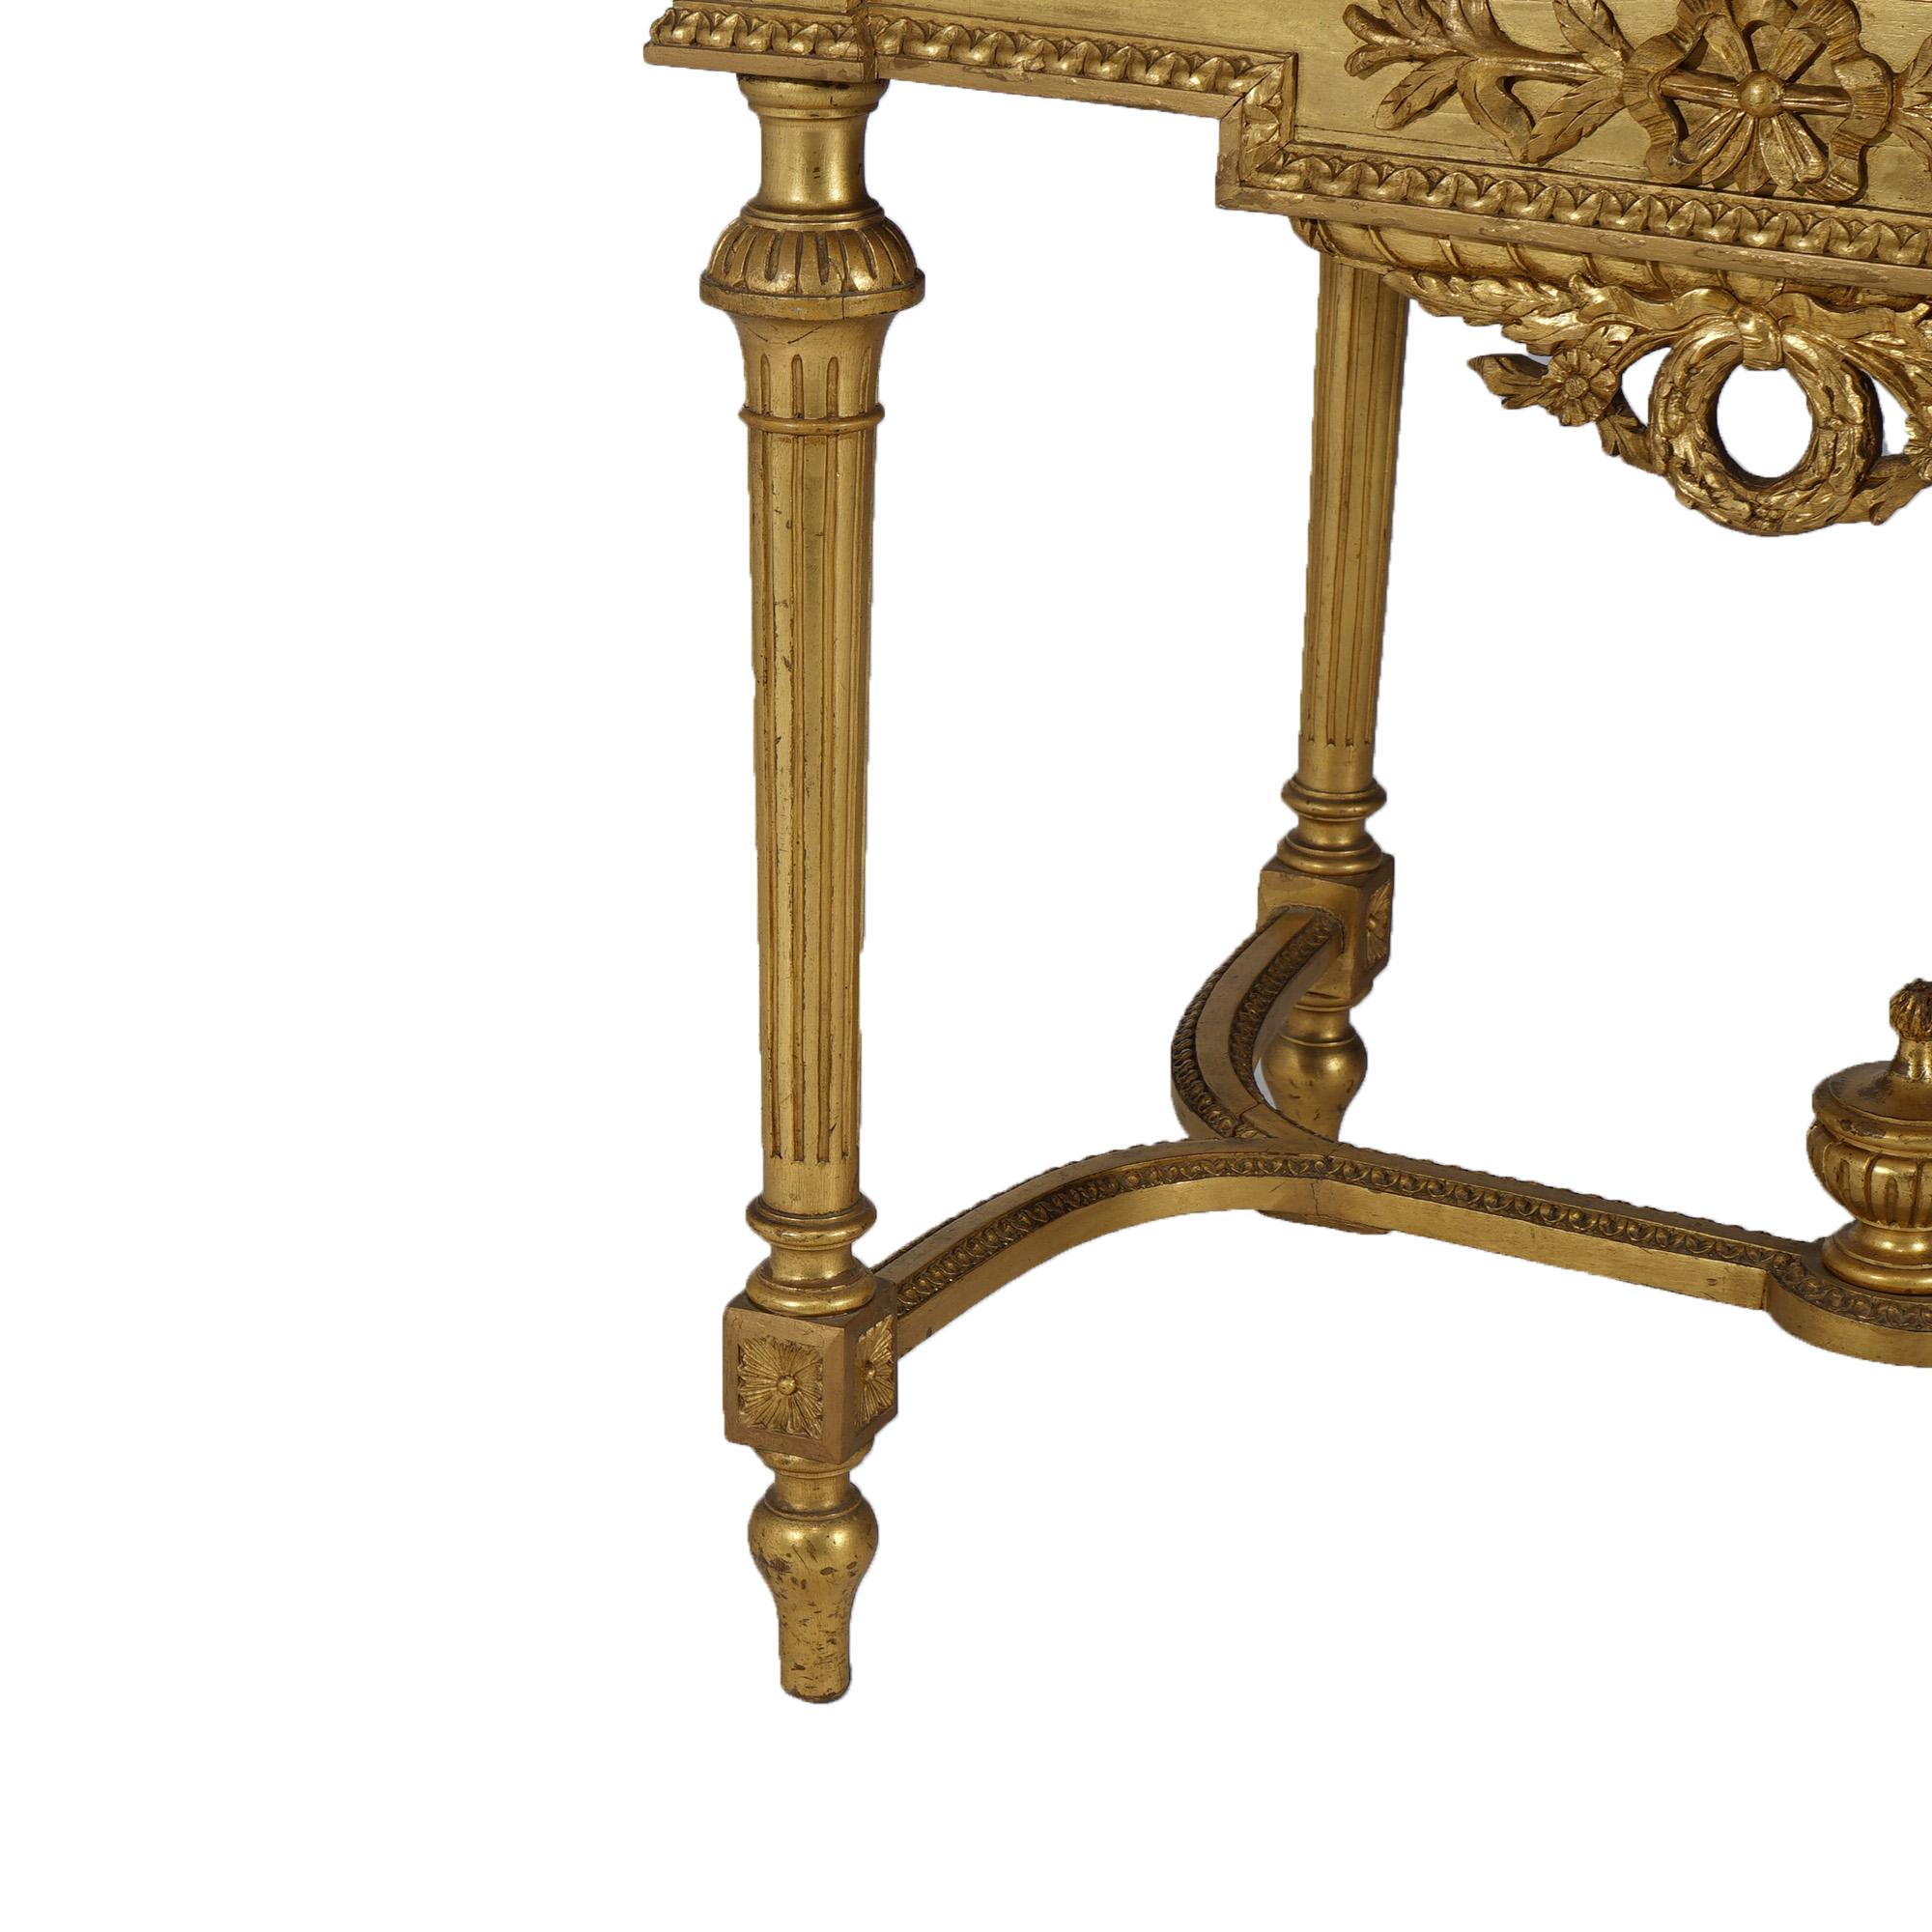 Antique French Louis XVI Style Giltwood Parlor Table with Faux Painted Top 19thC For Sale 1